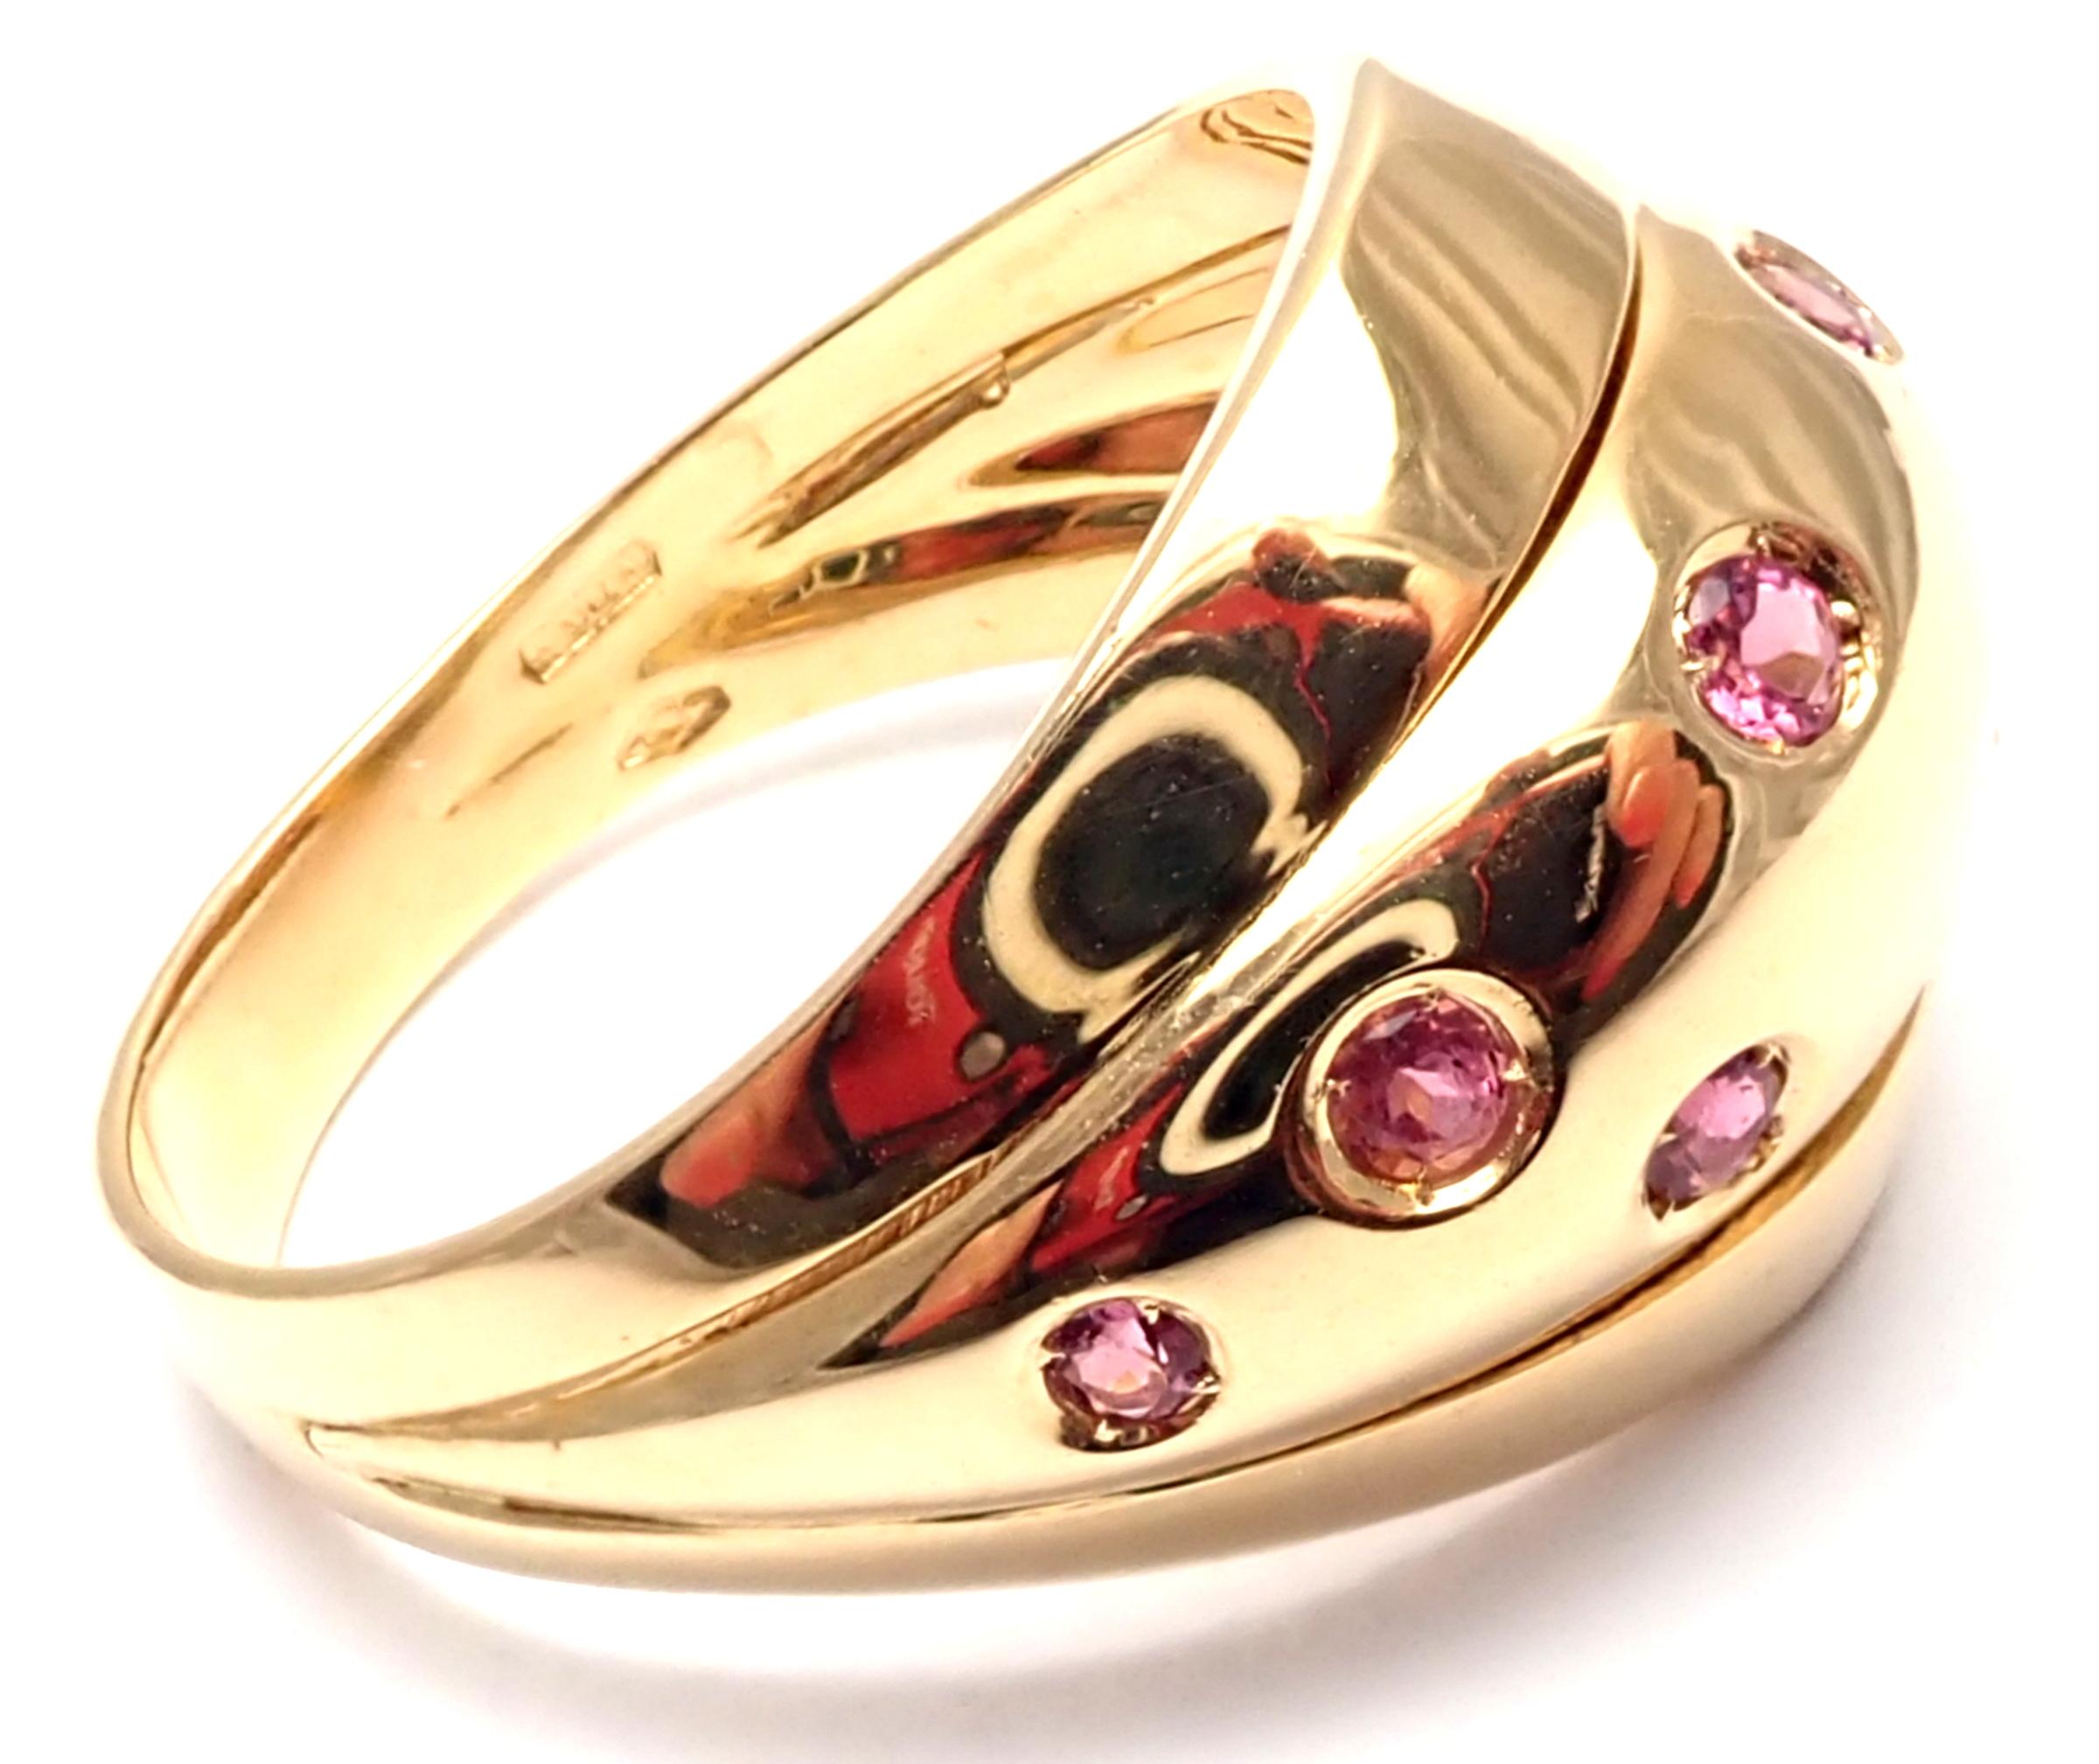 18k Yellow Gold Pink Sapphire Ring By Versace.
With 9 pink sapphires.
Details: 
Size: Size 7 1/2
Width: 16mm to 4mm 
Weight: 8.4 grams
Stamped Hallmarks: Versace 750 Made in Italy
*Free Shipping within the United States* 
Your Price: $2,900
Retail